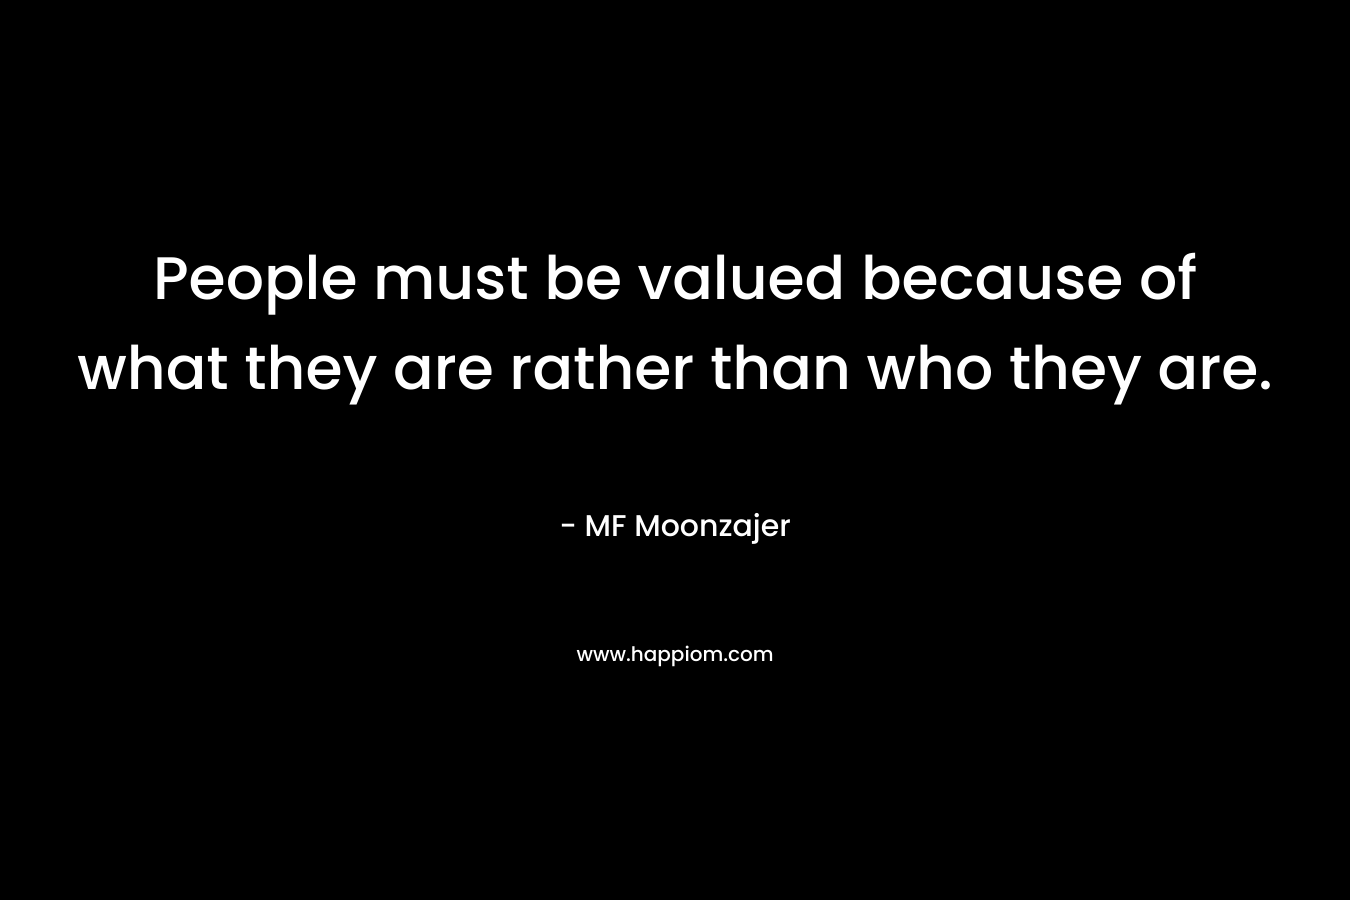 People must be valued because of what they are rather than who they are.